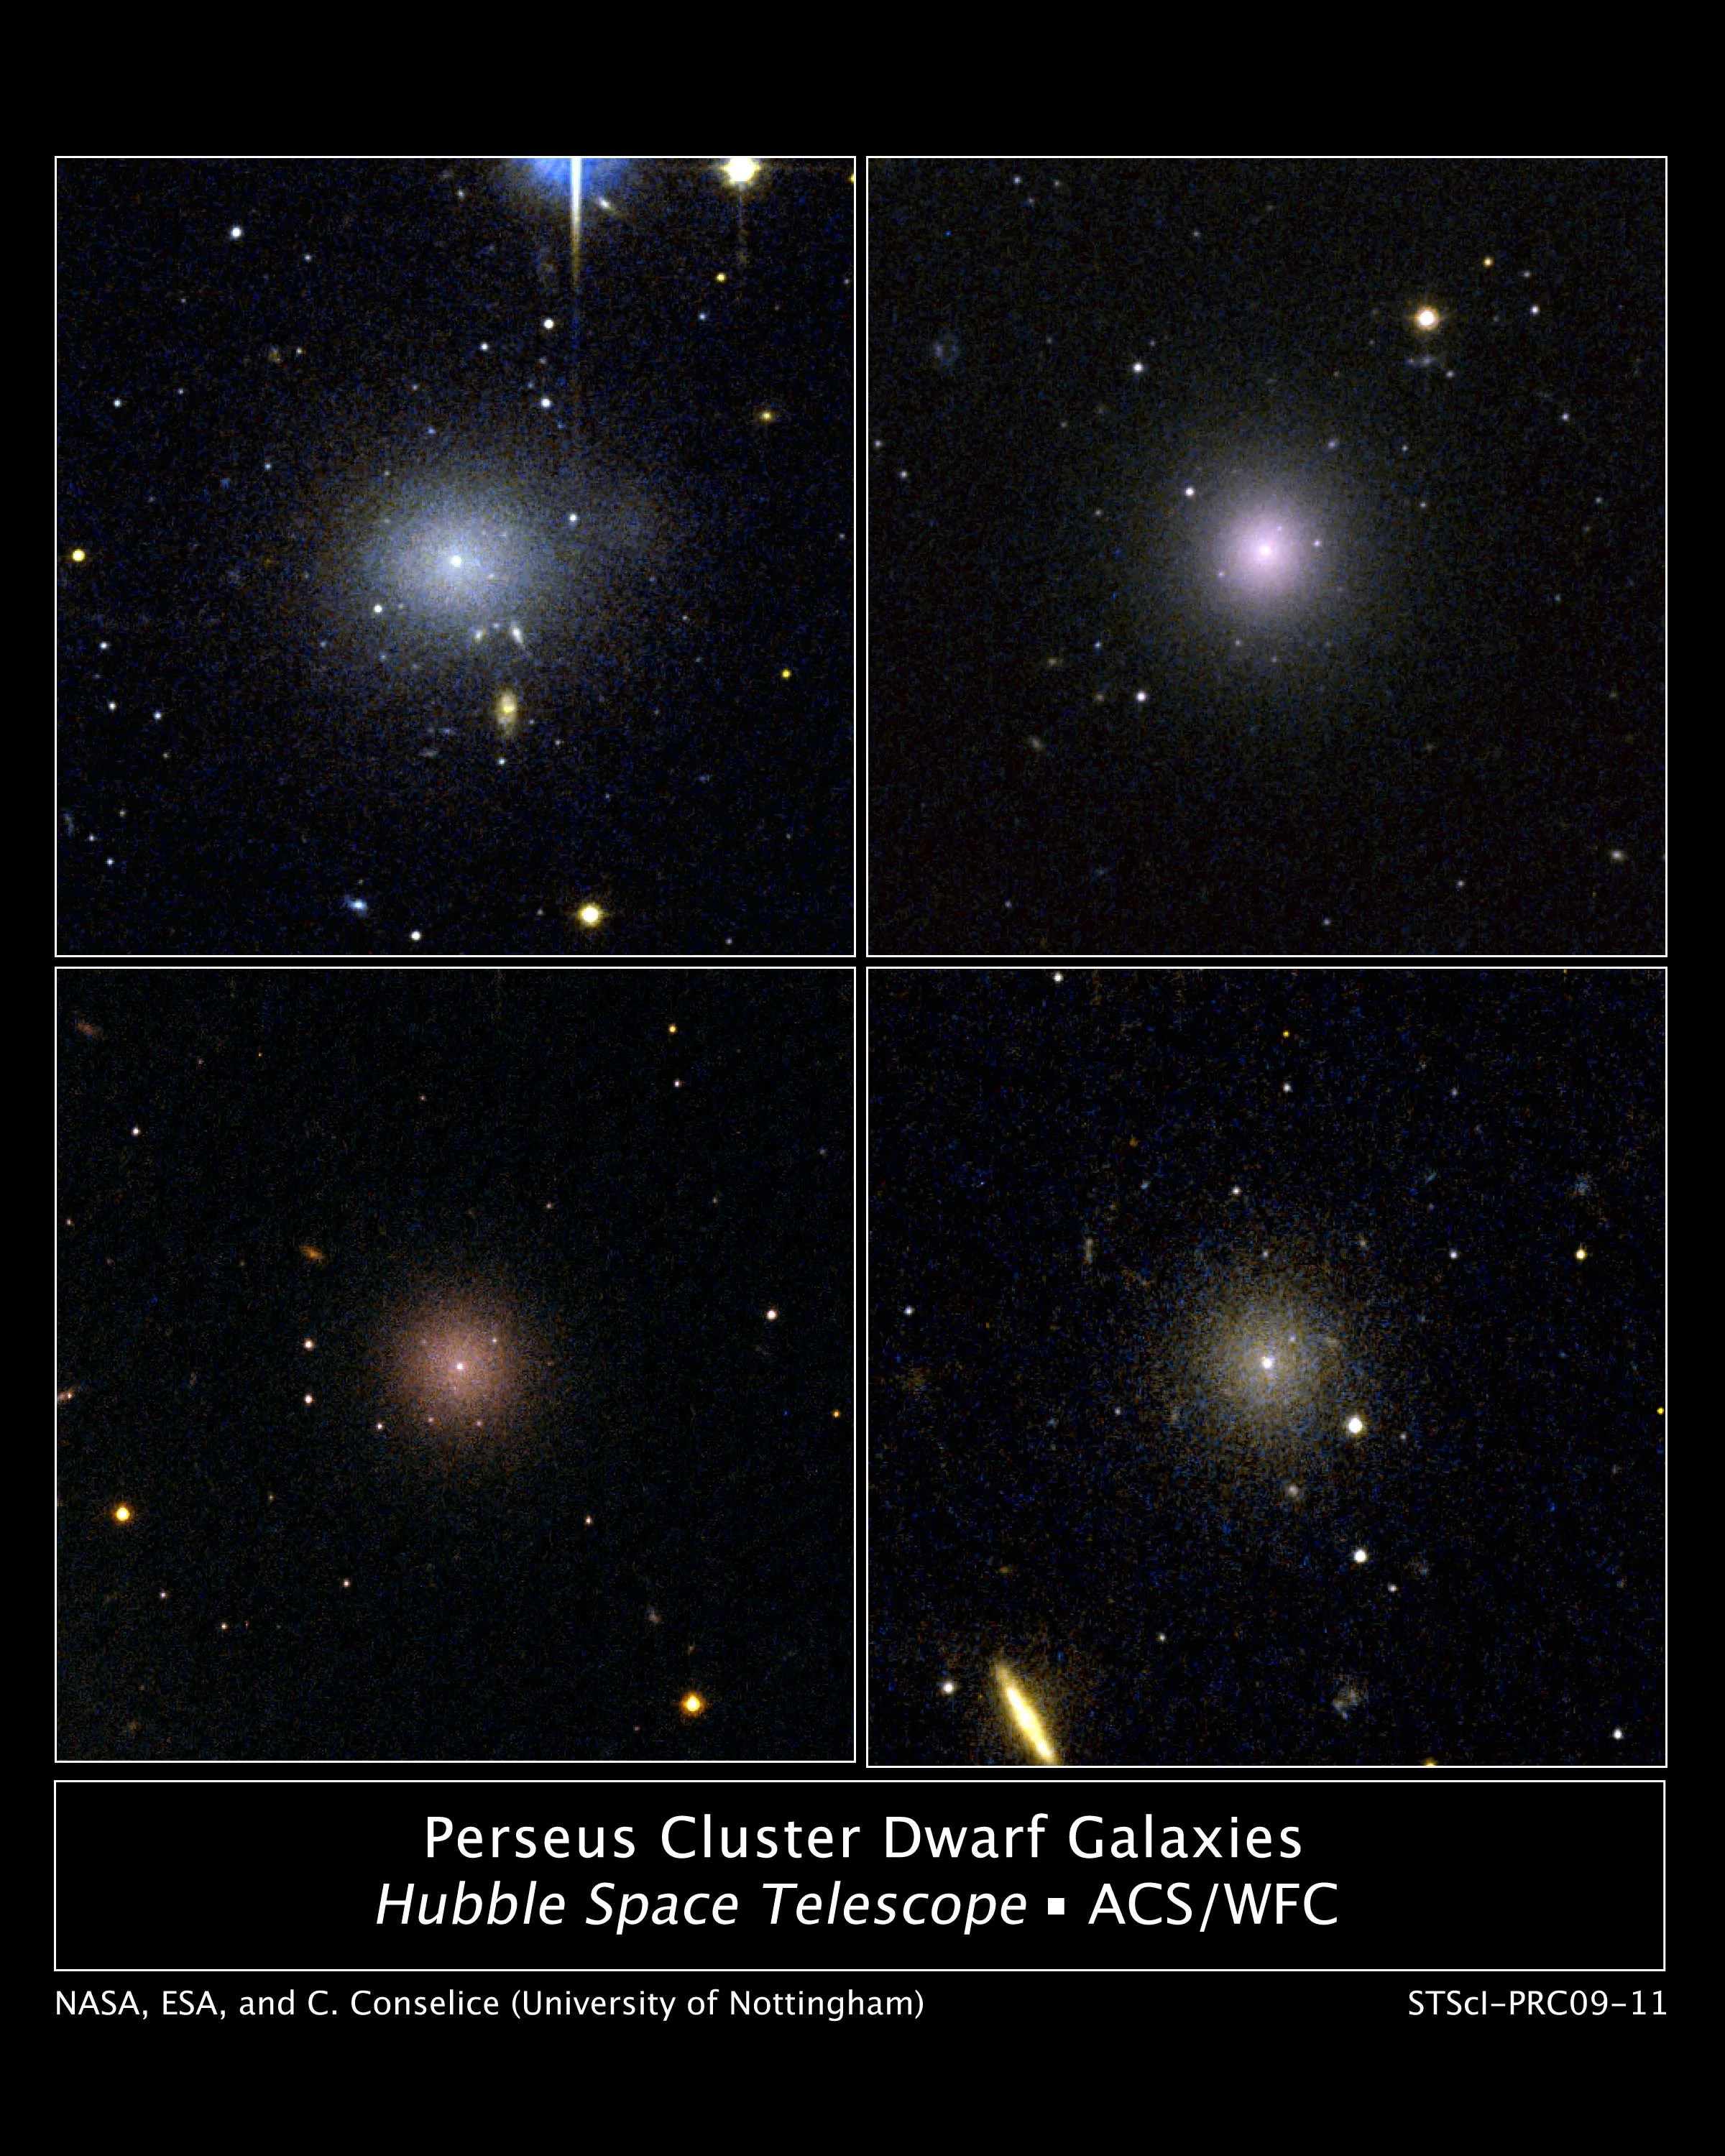 HST images of Perseus Cluster dwarf galaxies